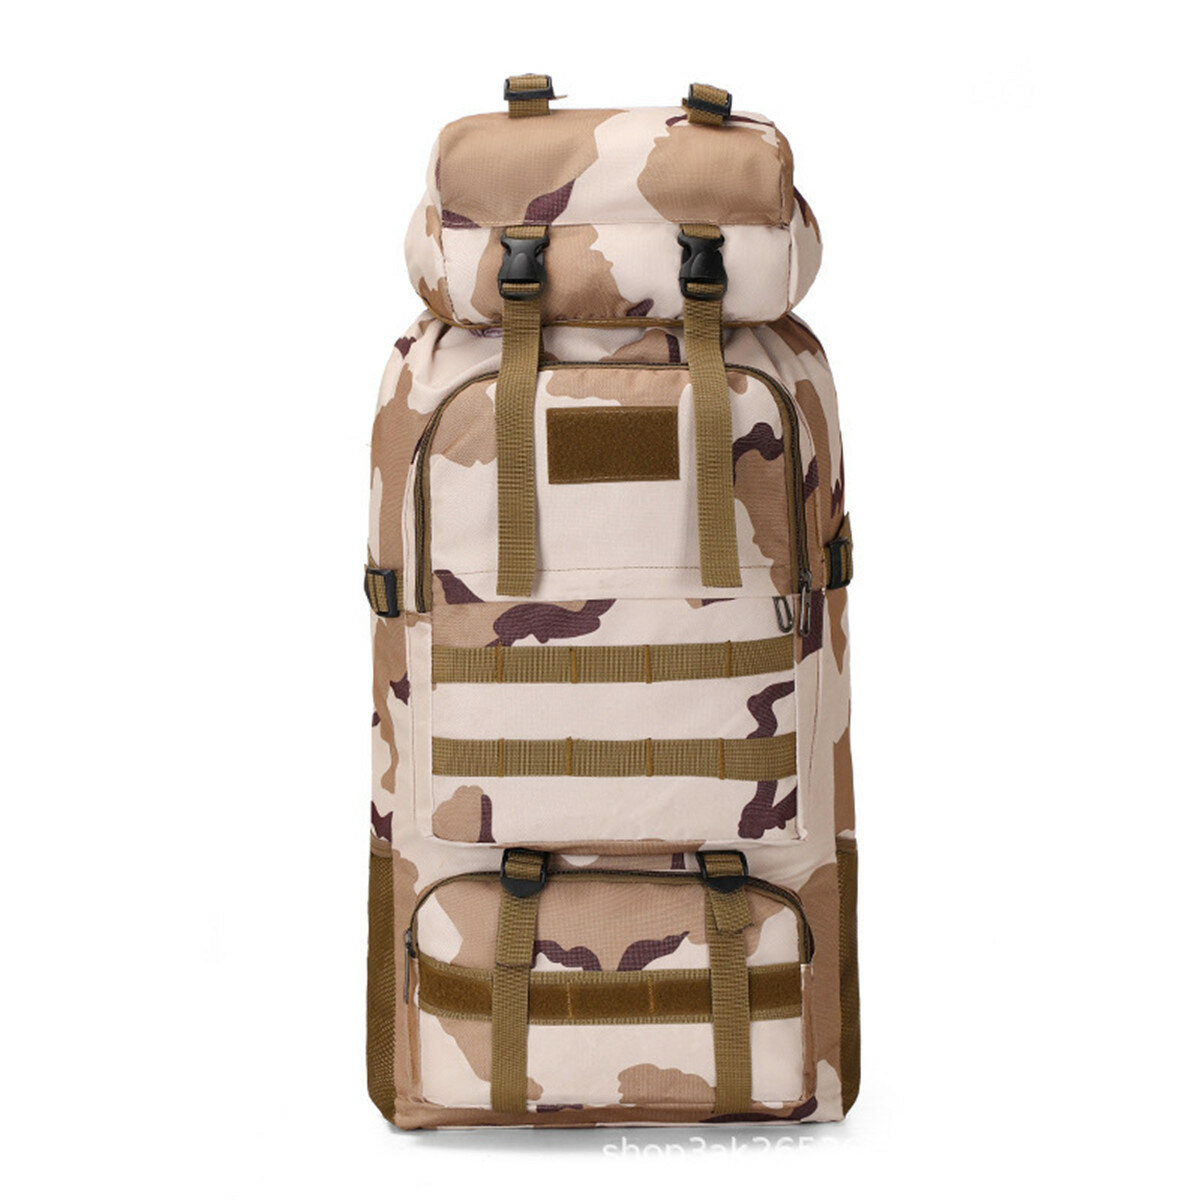 Camouflage Hiking Bag Large Capacity Camouflage Backpack Sports Camping Hiking Fishing Hunting Climbing Outdoor Rucksack